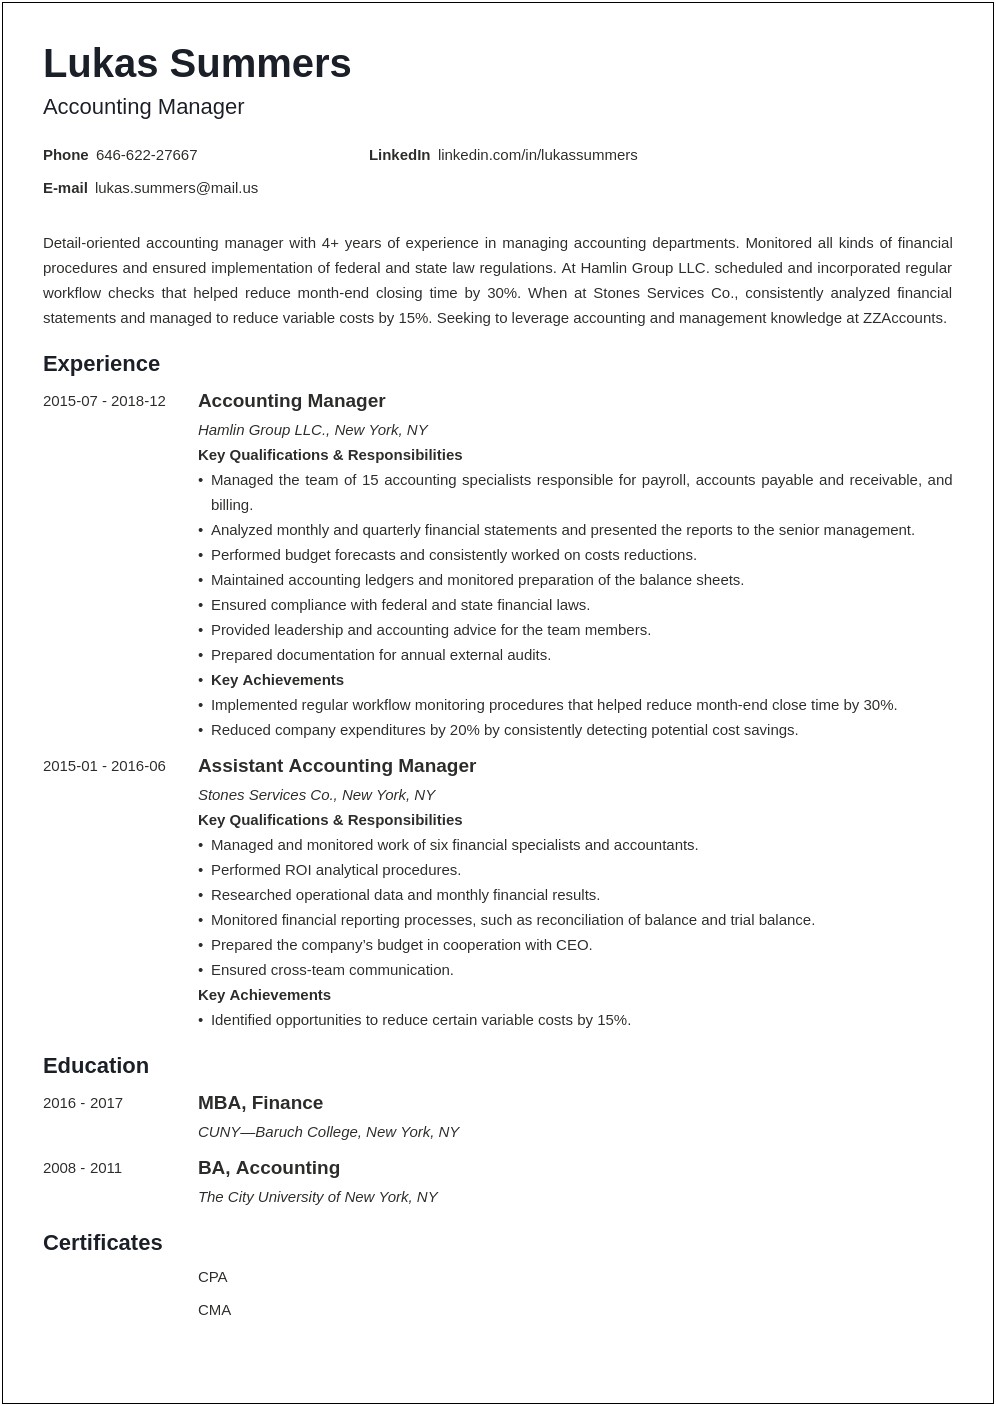 Resume Summary For Director Of Accounting